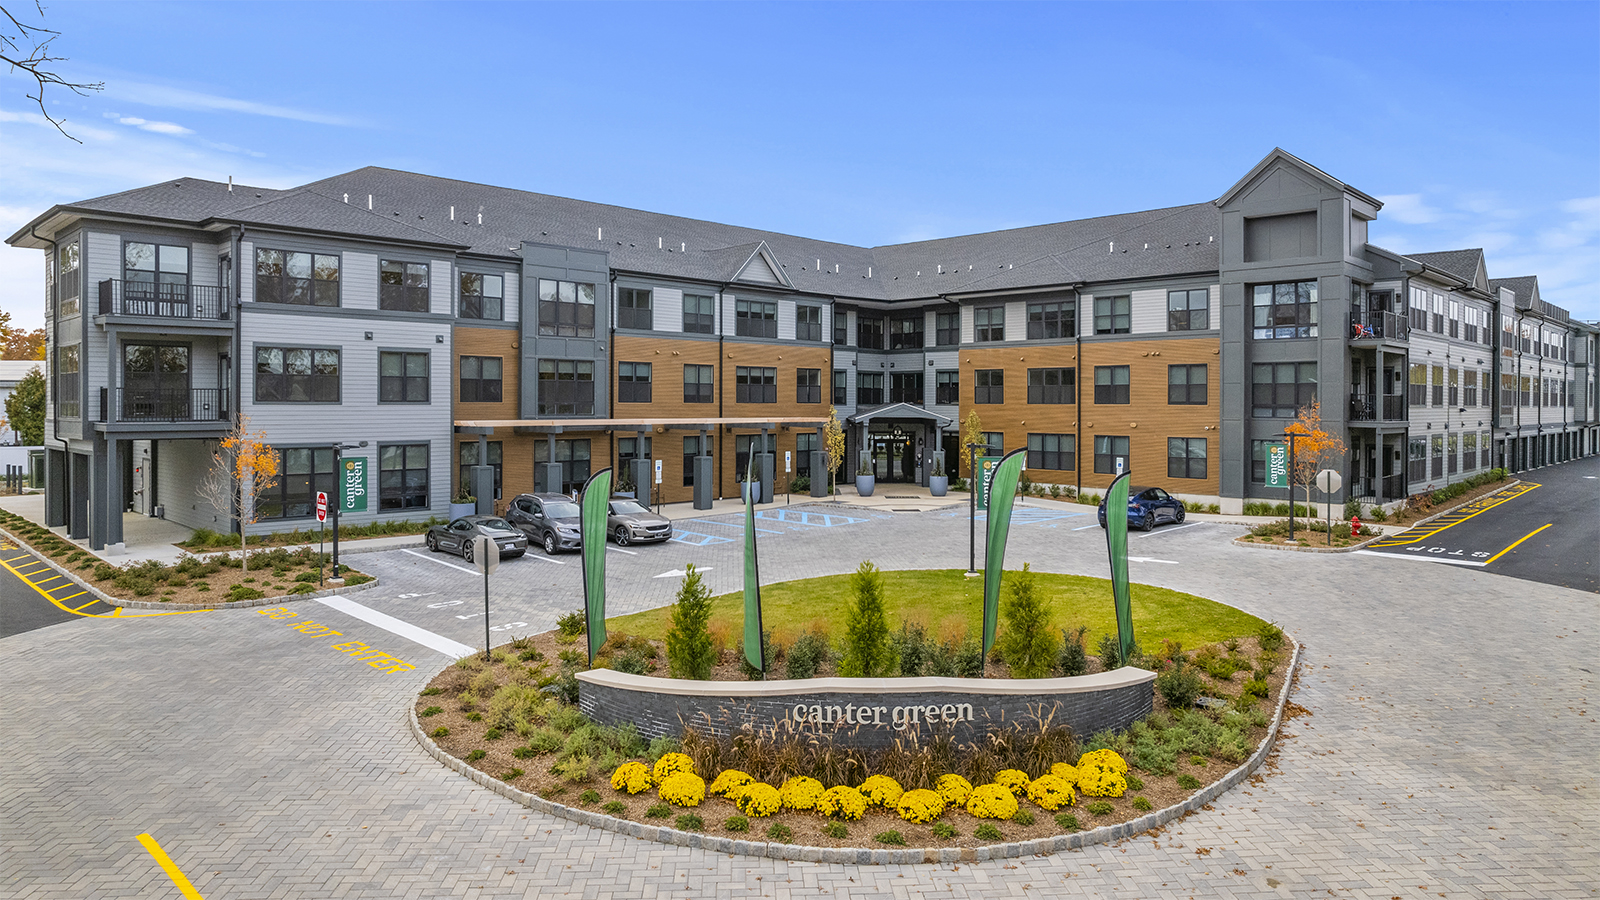 Canter Green is a pet-friendly apartment community in Union, NJ